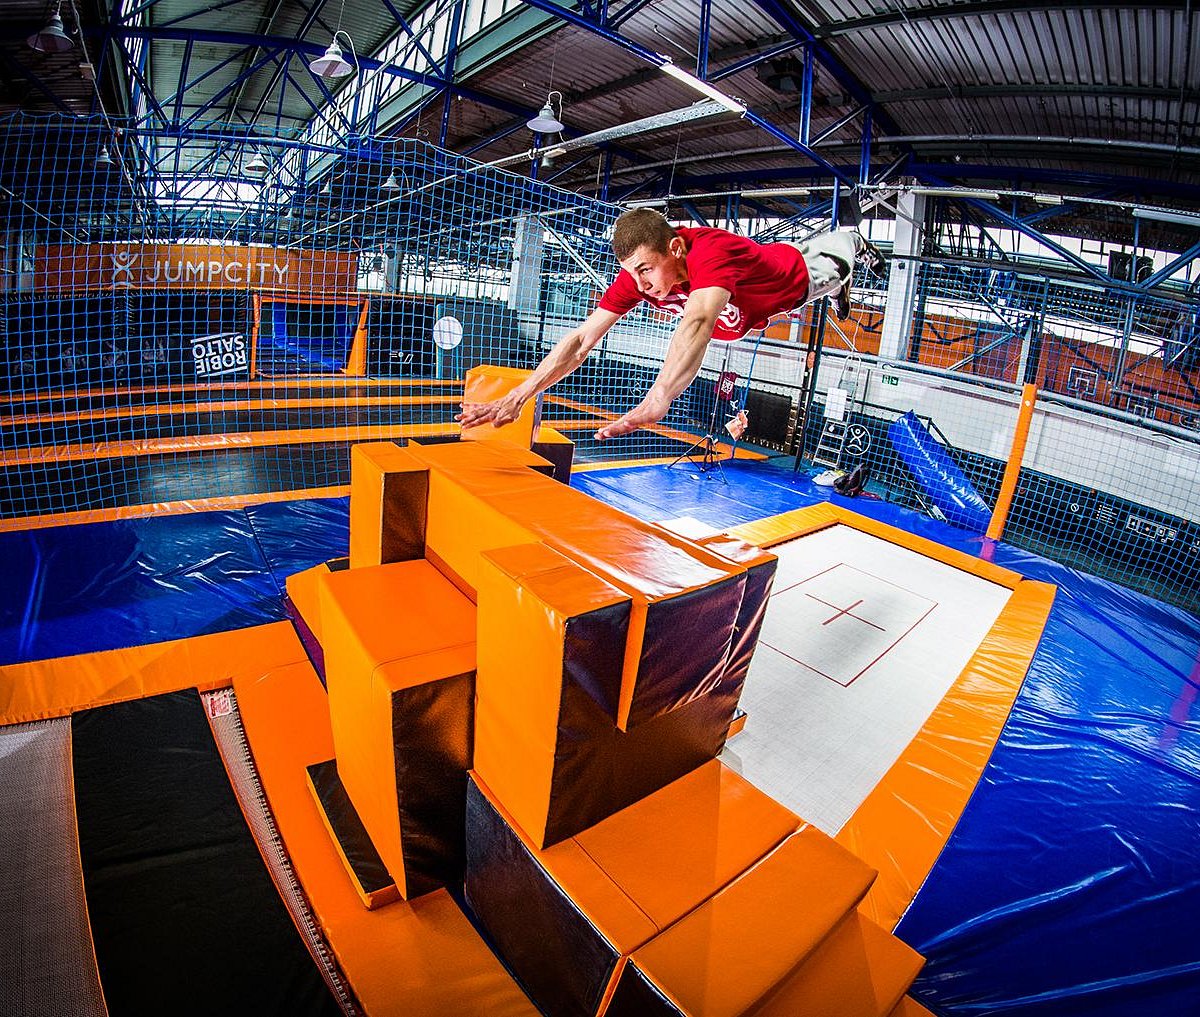 JUMPCITY Trampoline Park - Gdynia - All You Need BEFORE You Go